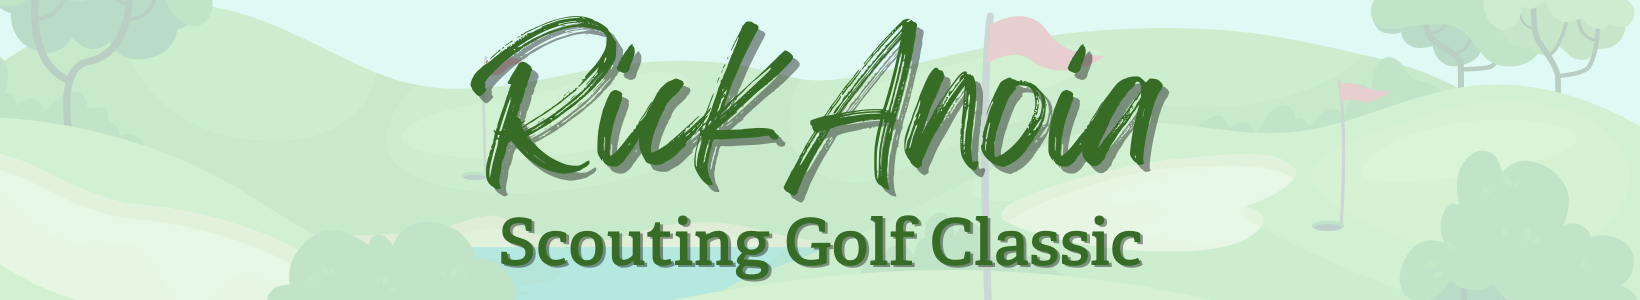 Header Image Rick Anoia Scouting Golf Classic